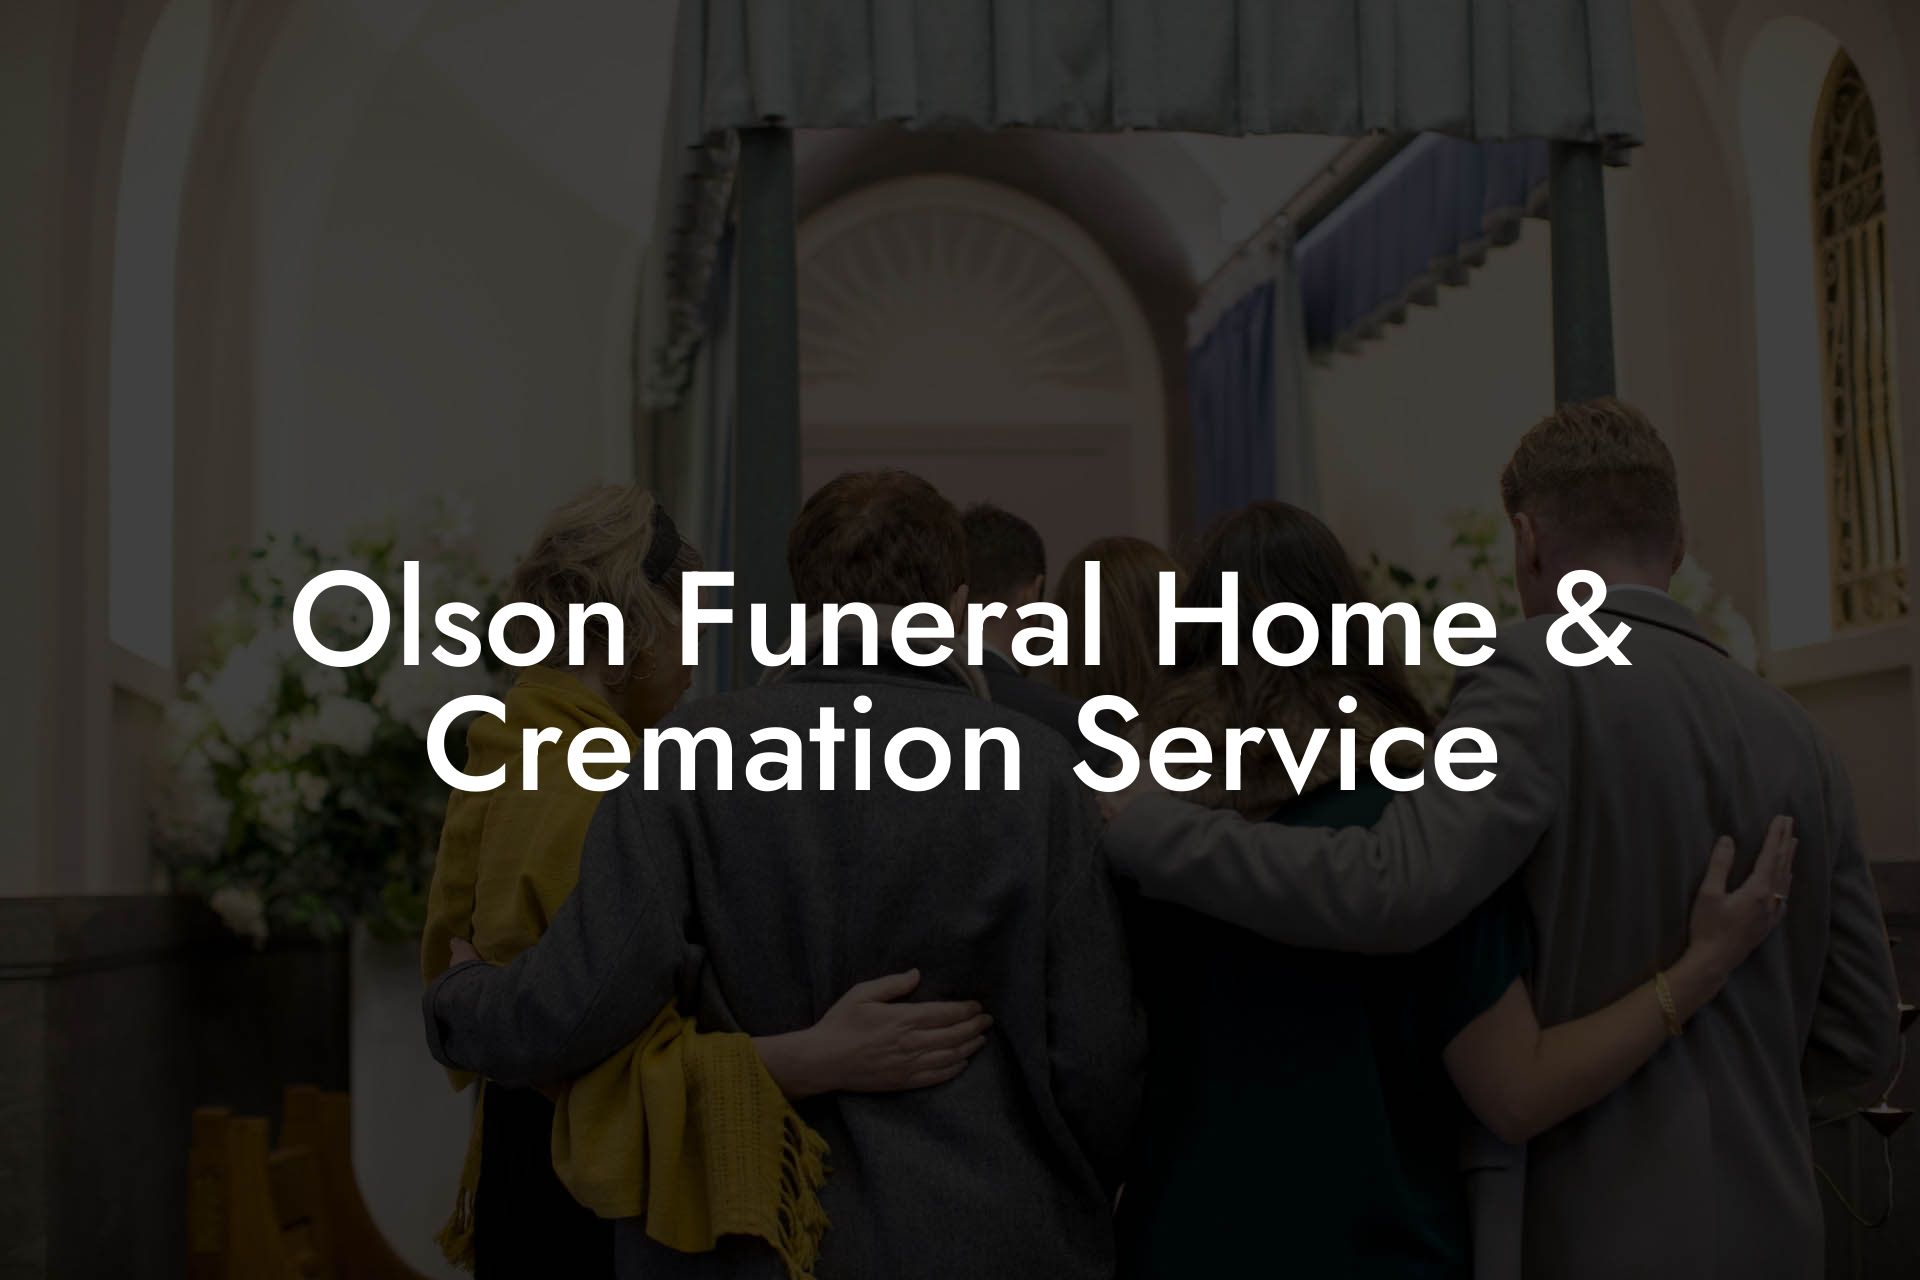 Olson Funeral Home & Cremation Service